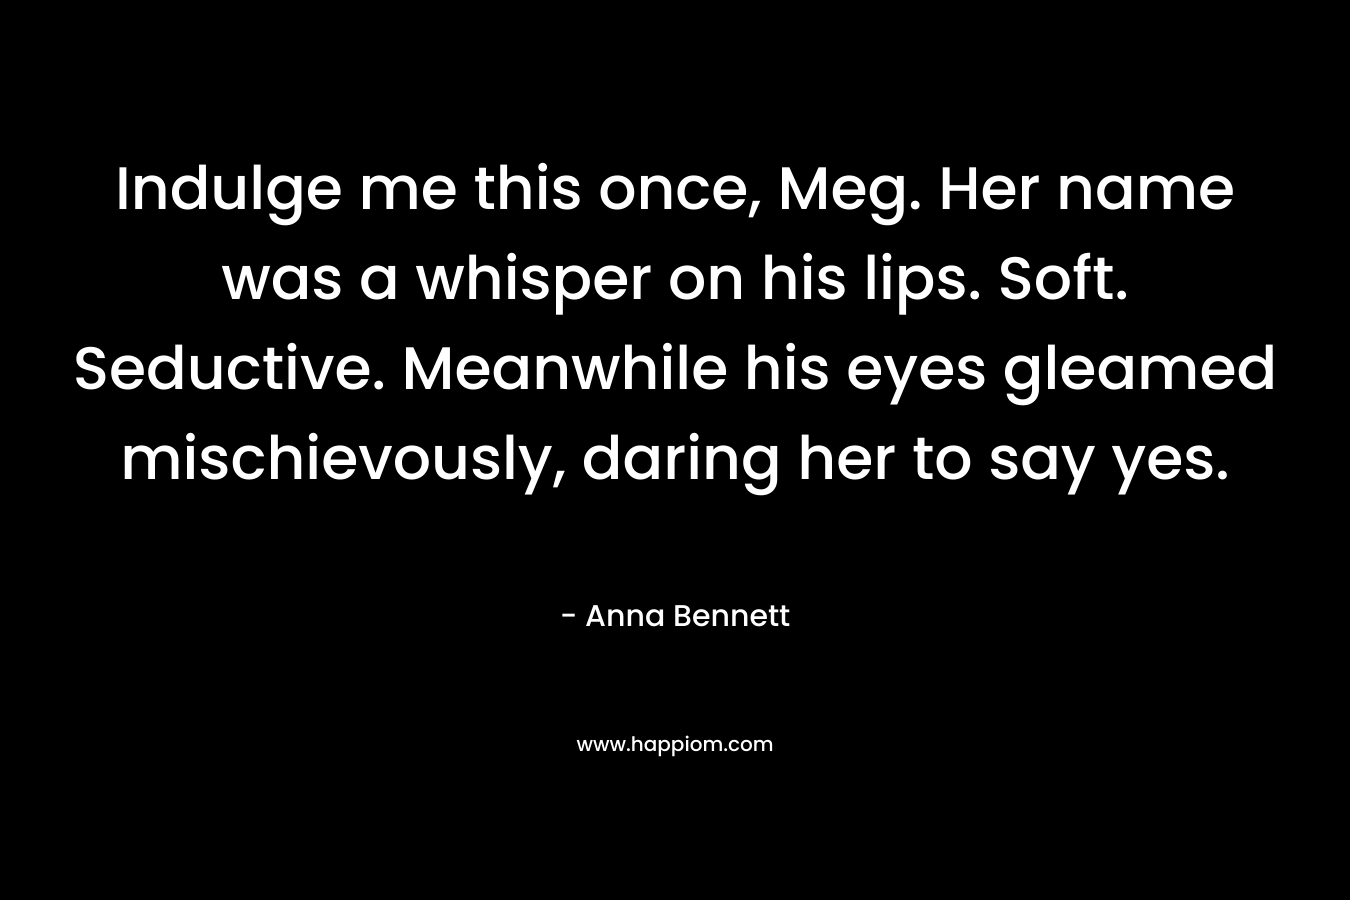 Indulge me this once, Meg. Her name was a whisper on his lips. Soft. Seductive. Meanwhile his eyes gleamed mischievously, daring her to say yes. – Anna  Bennett